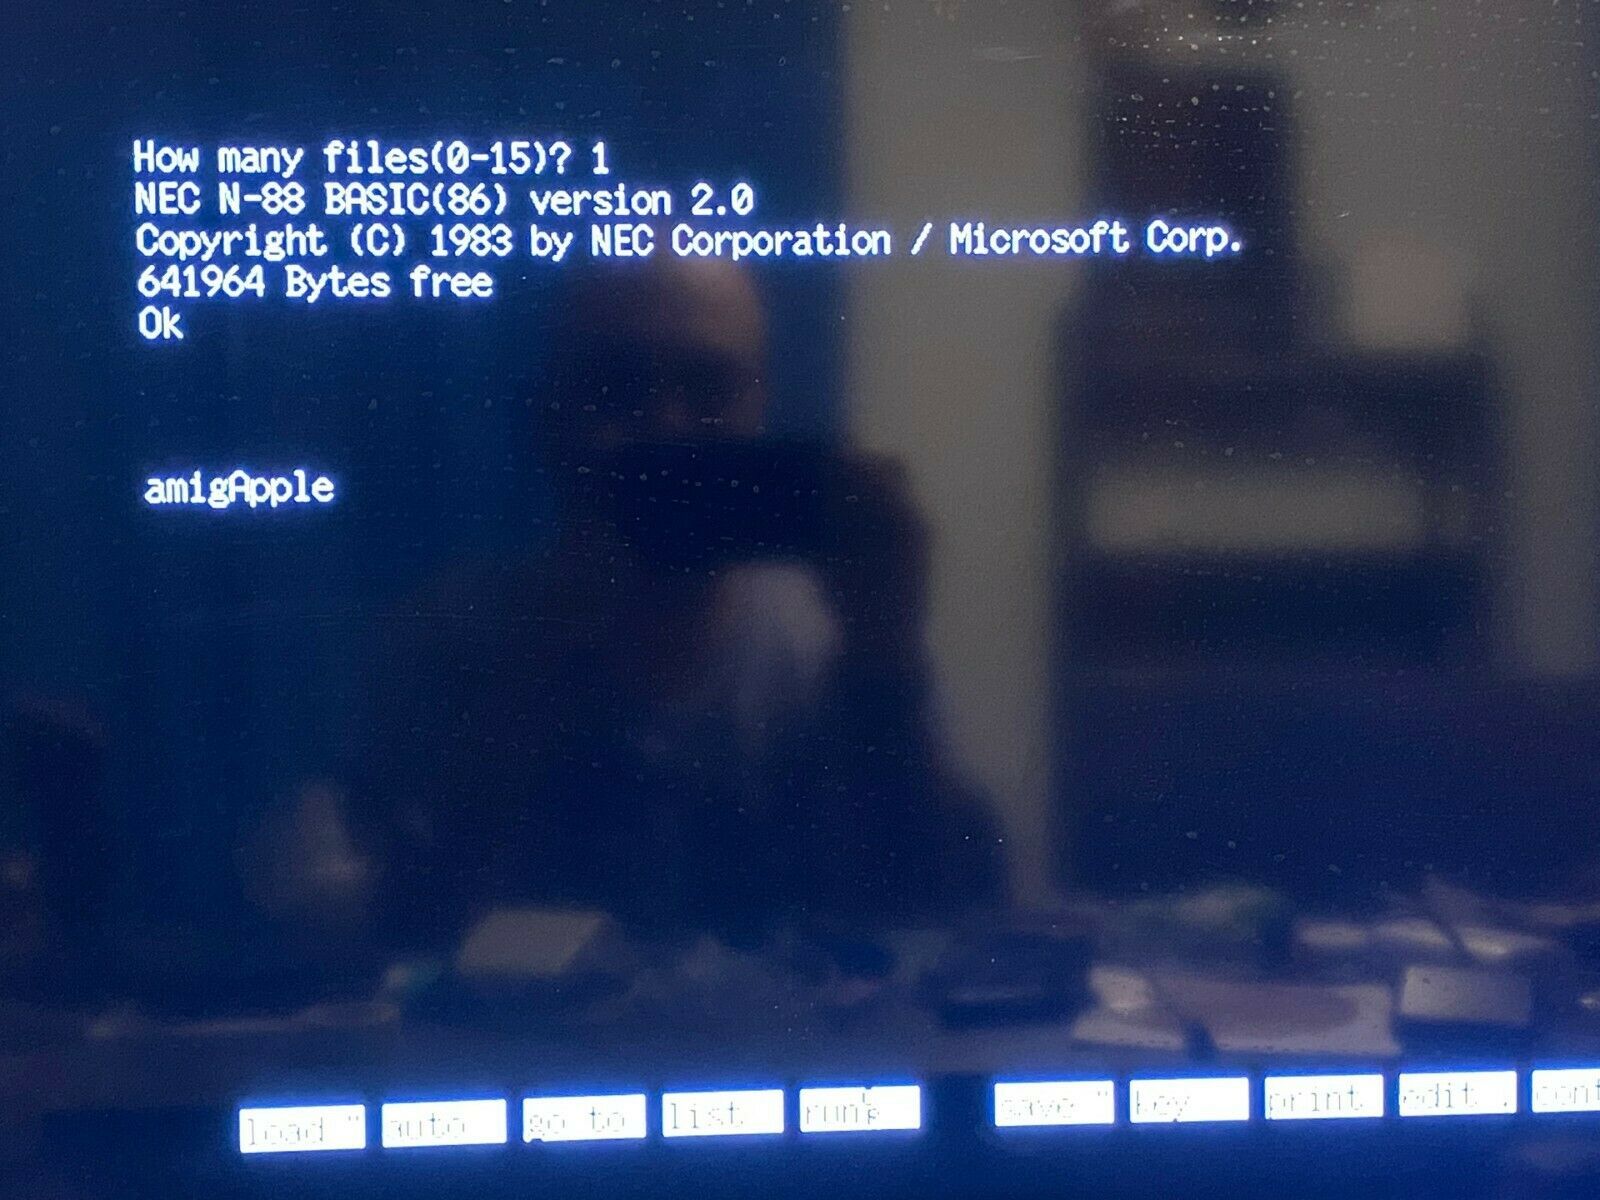 NEC PC 9800 N-88 emulator for raspberry pi with games